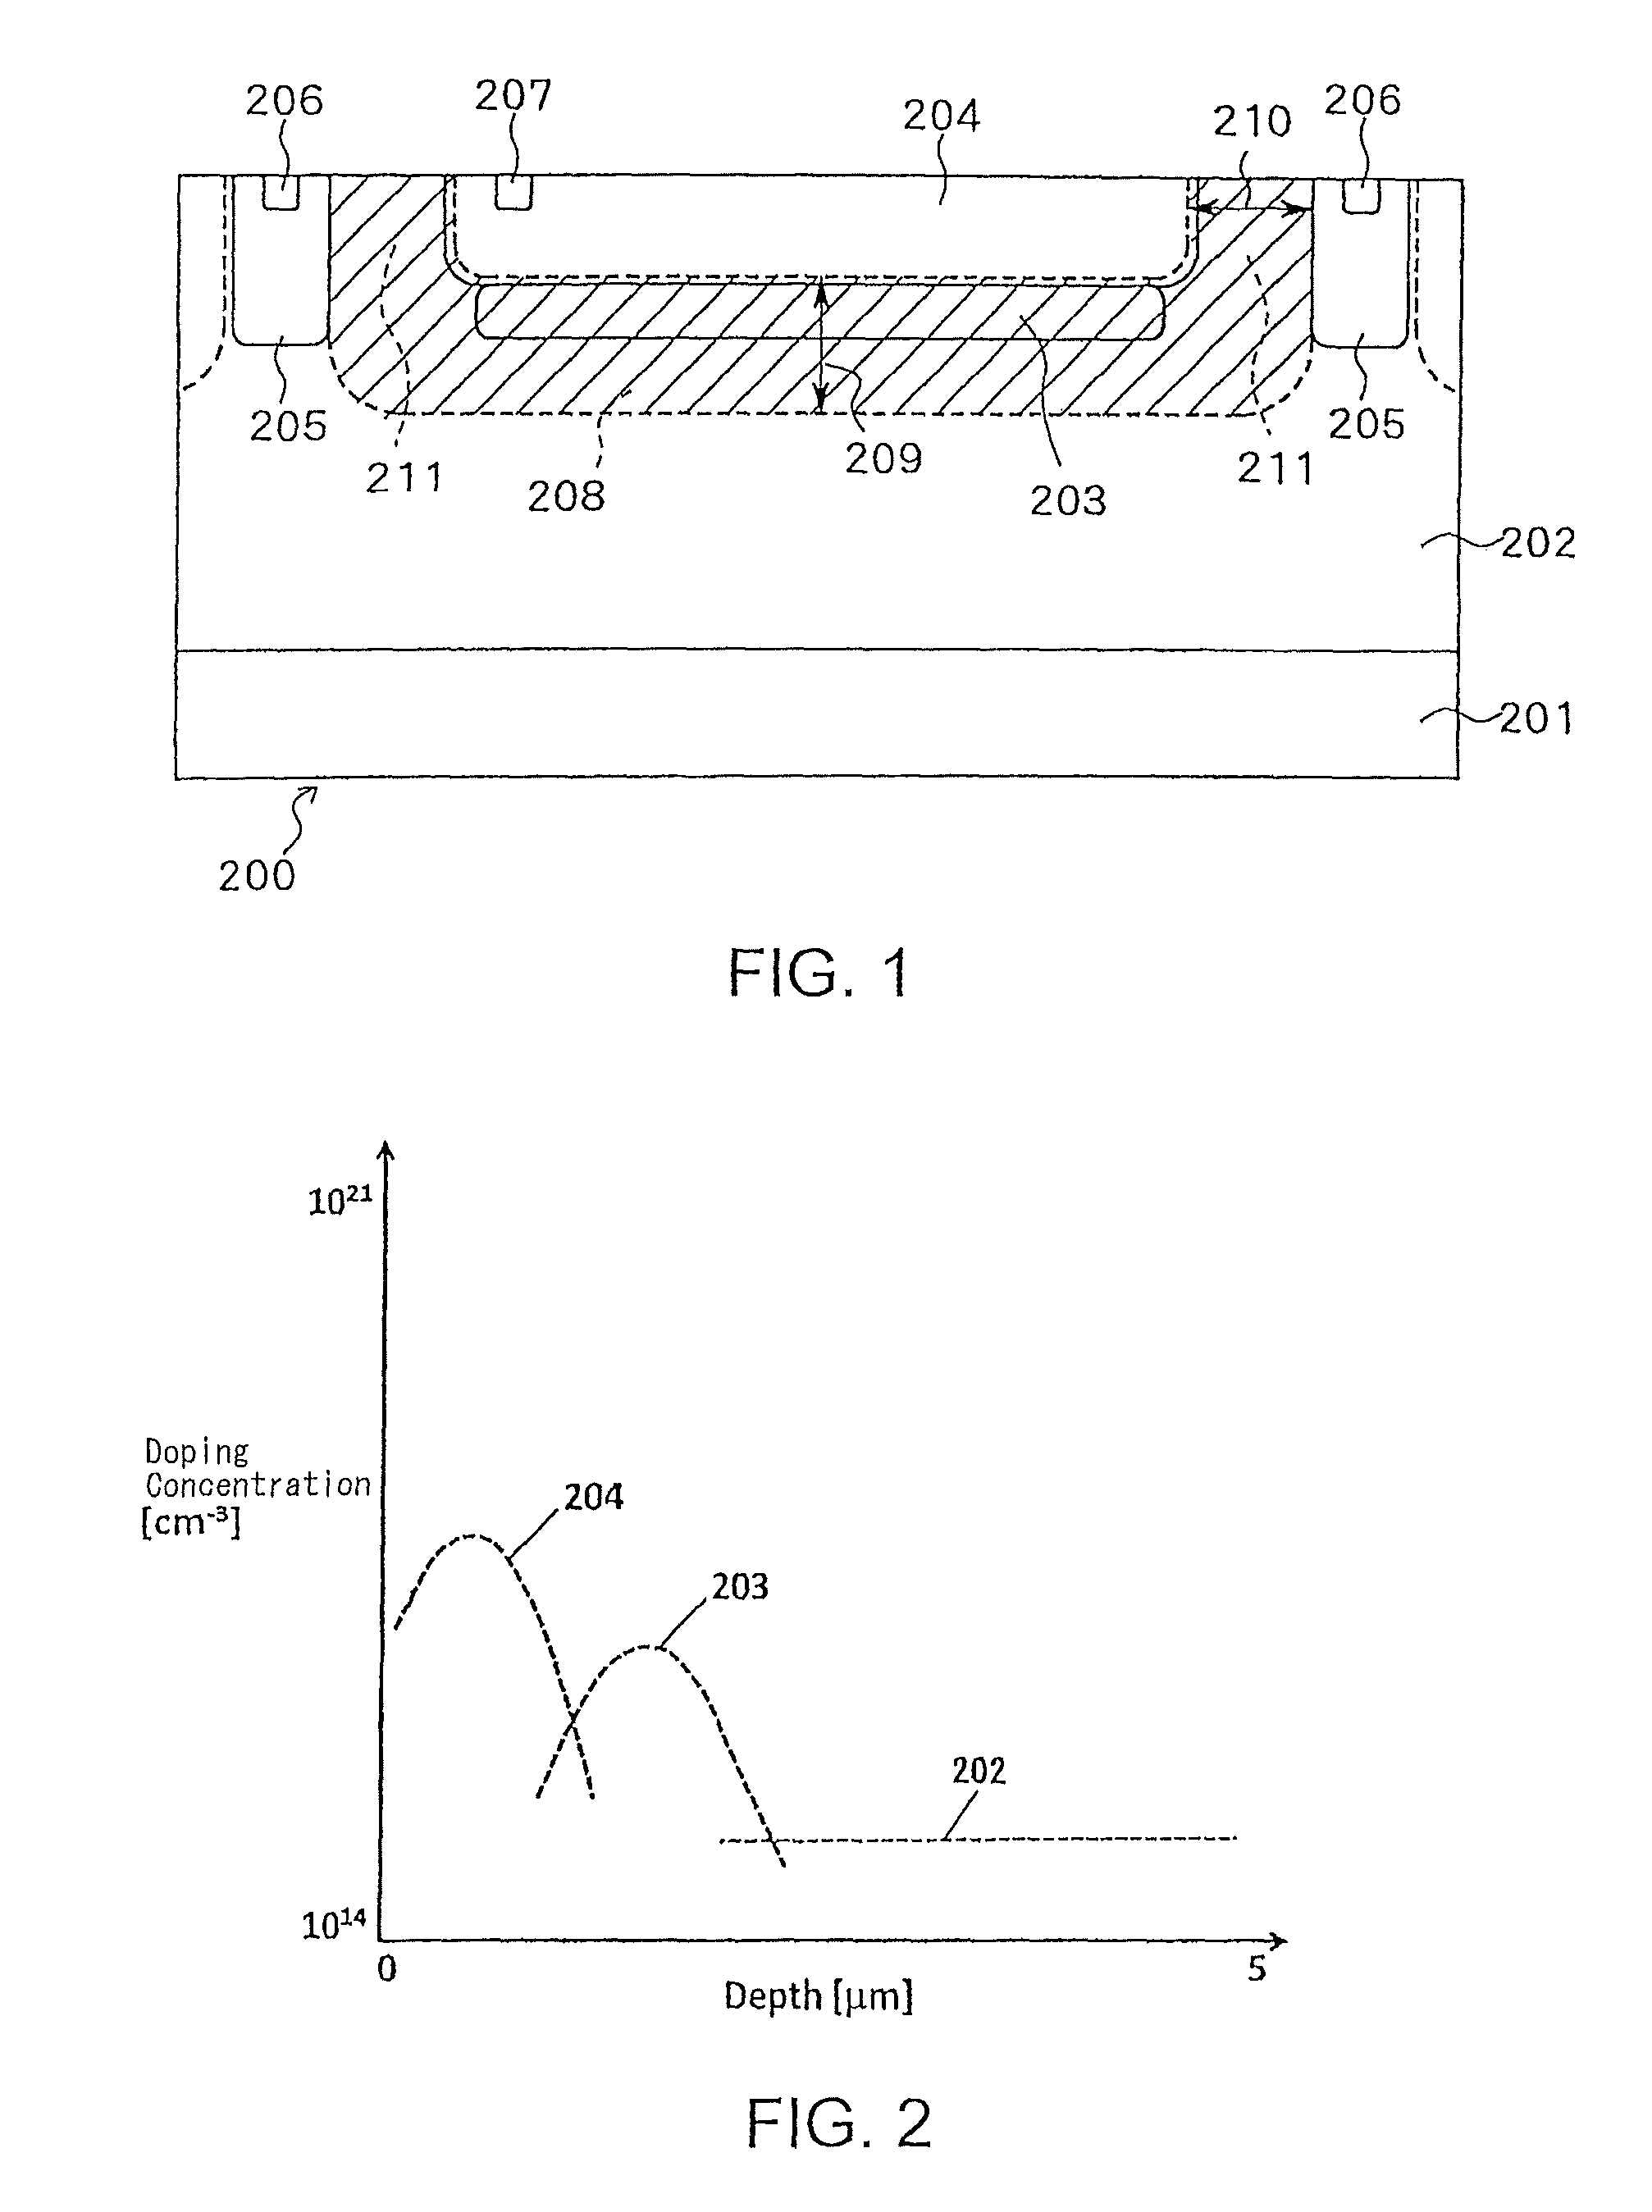 Single photon avalanche diode with second semiconductor layer burried in epitaxial layer